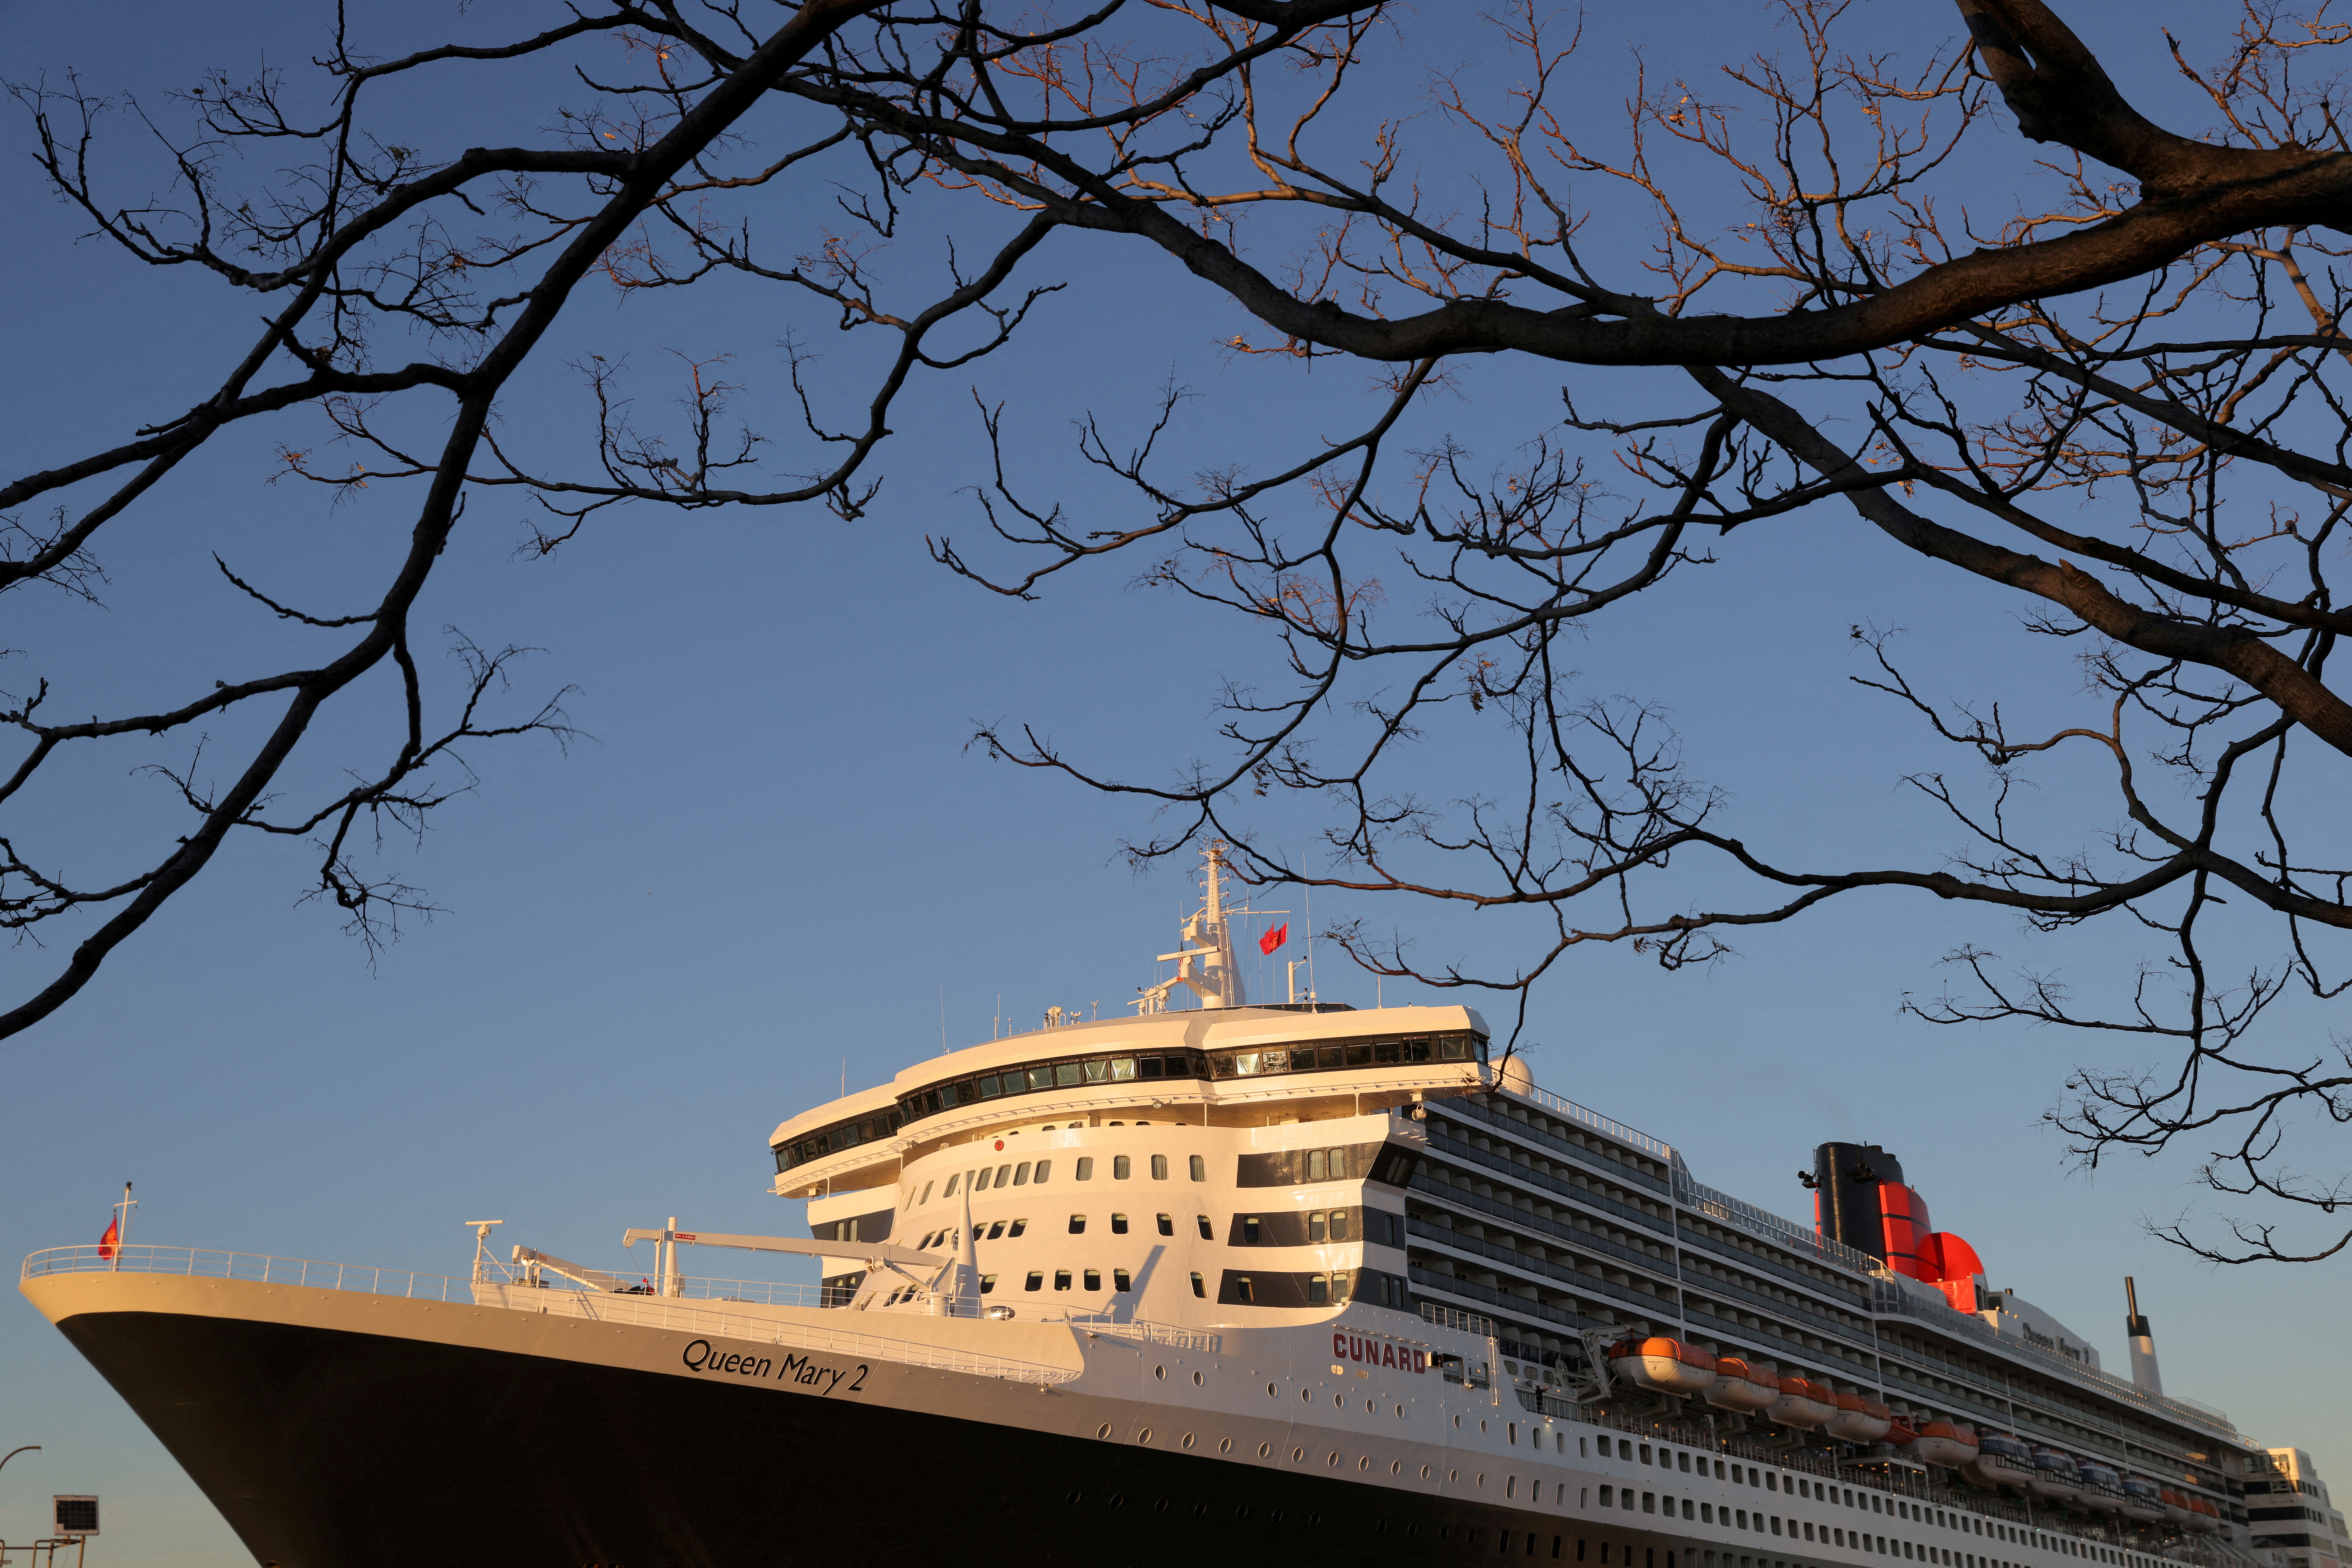 The Queen Mary 2 cruise ship by Cunard Line, owned by Carnival Corporation & plc. is seen docked at Brooklyn Cruise Terminal in Brooklyn, New York City